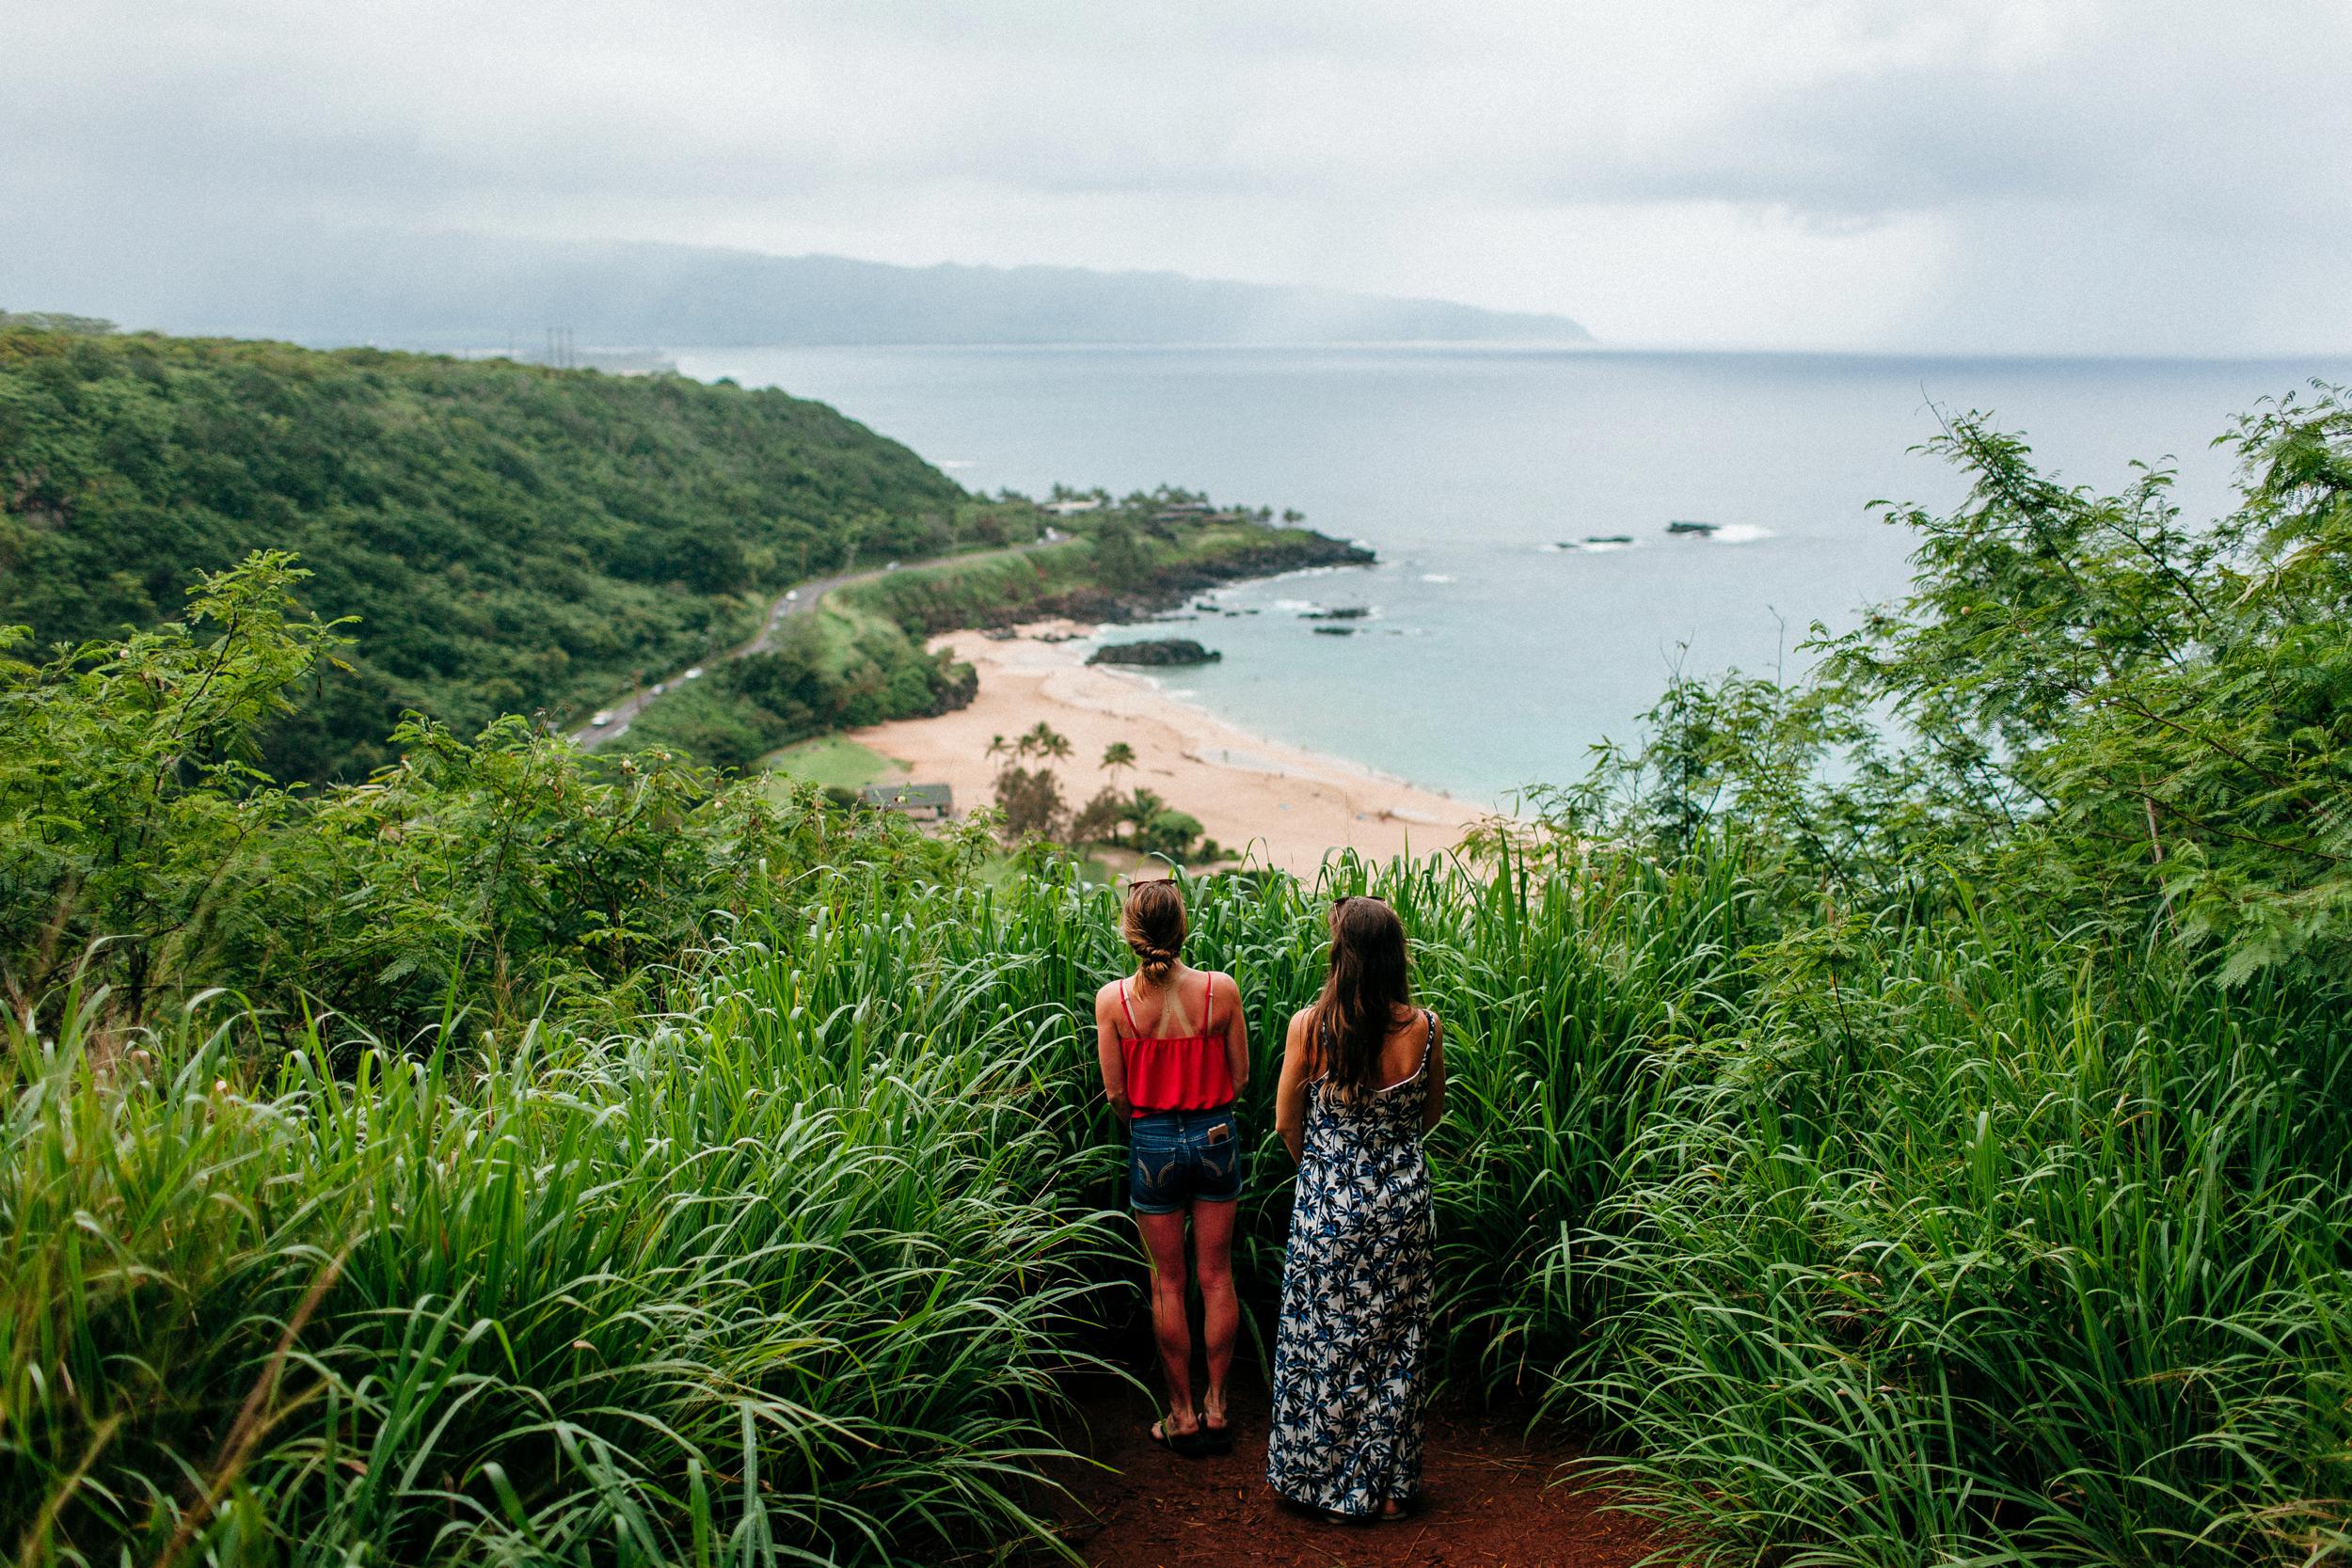  Our Hawaii Life - Personal Journal 